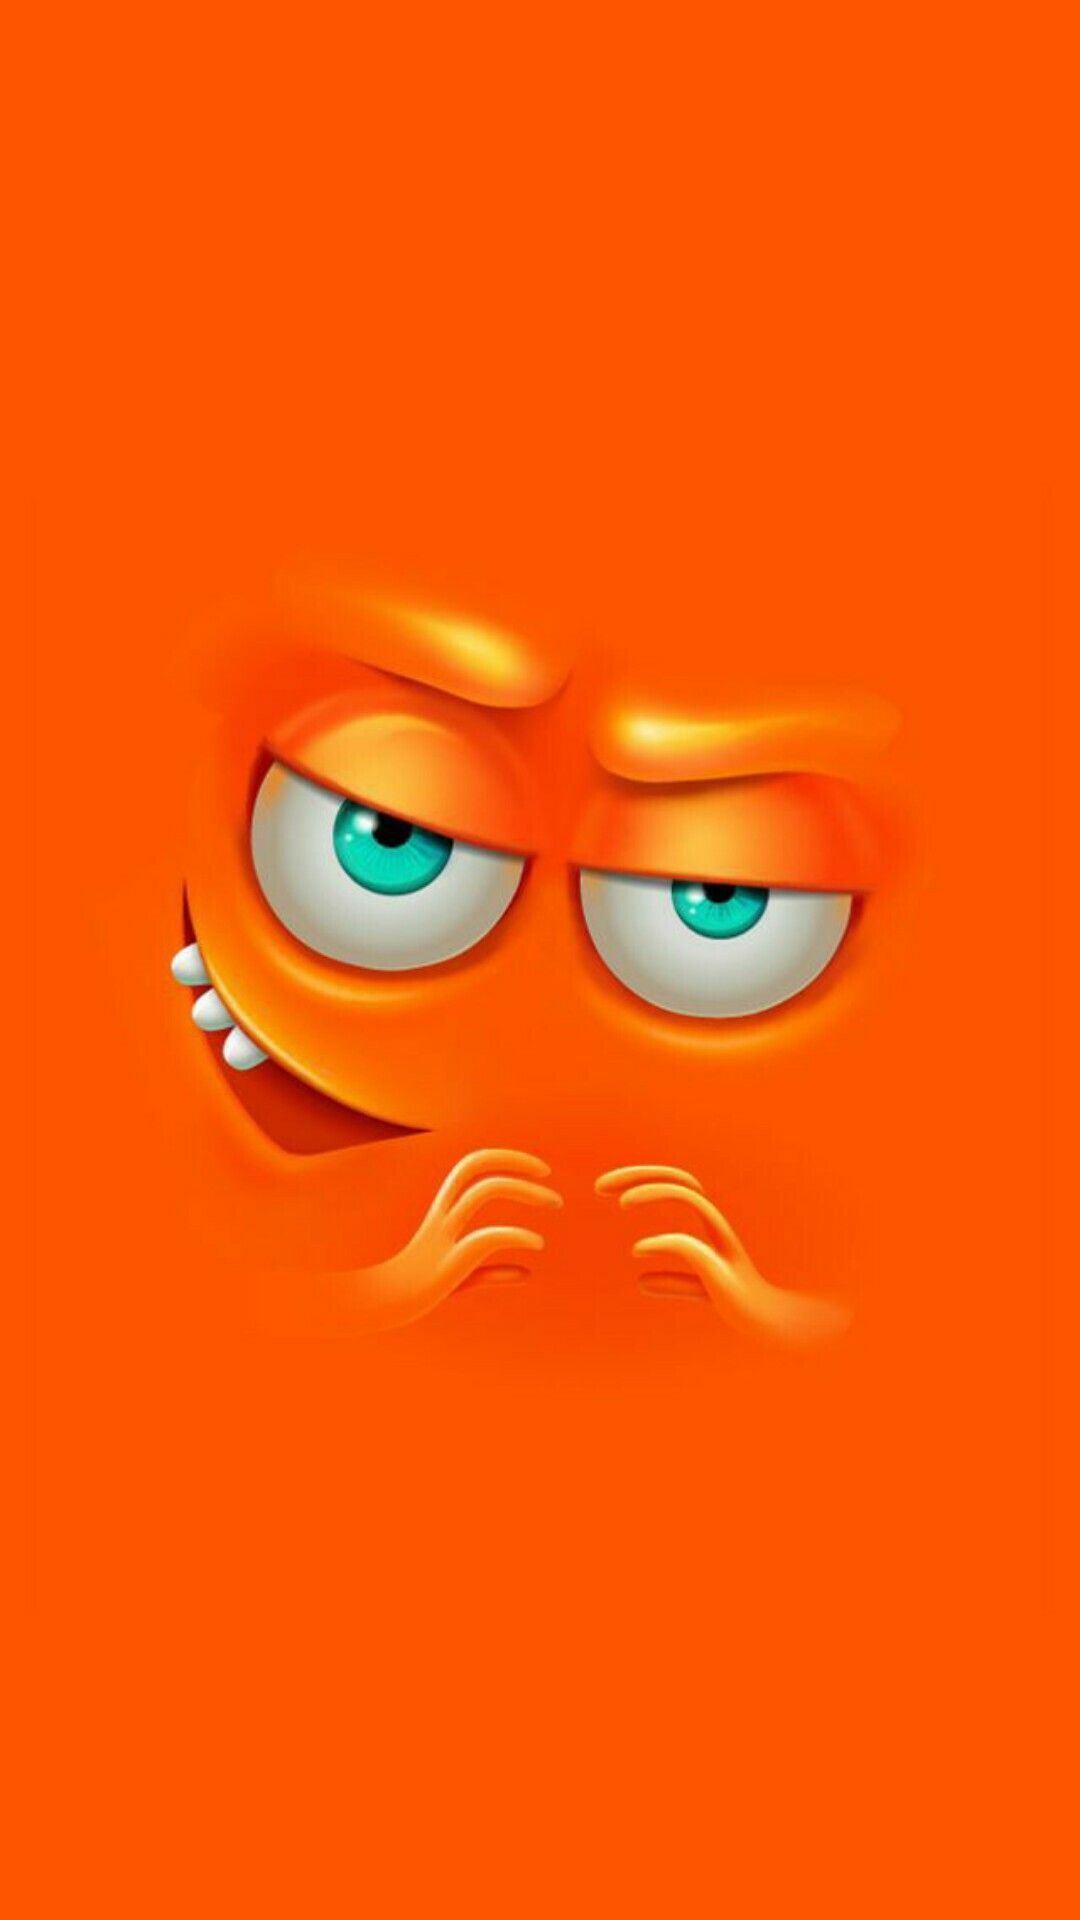 Awesome Silly Face Wallpaper - Wallpaper iphone cute, Funny iphone wallpaper, Cartoon wallpaper hd